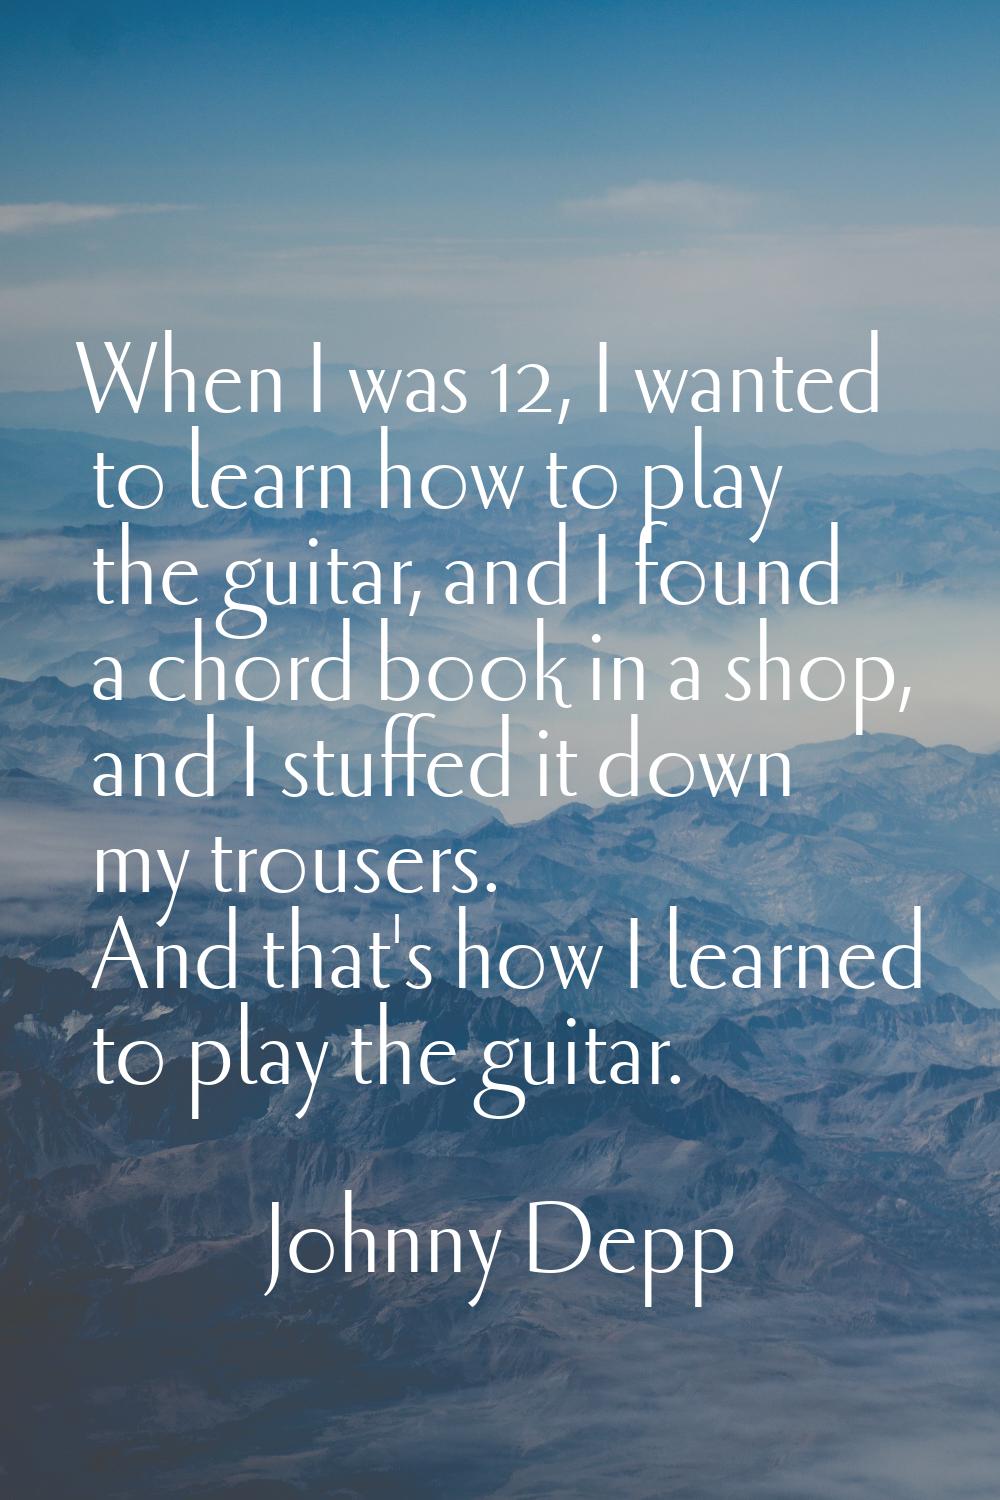 When I was 12, I wanted to learn how to play the guitar, and I found a chord book in a shop, and I 